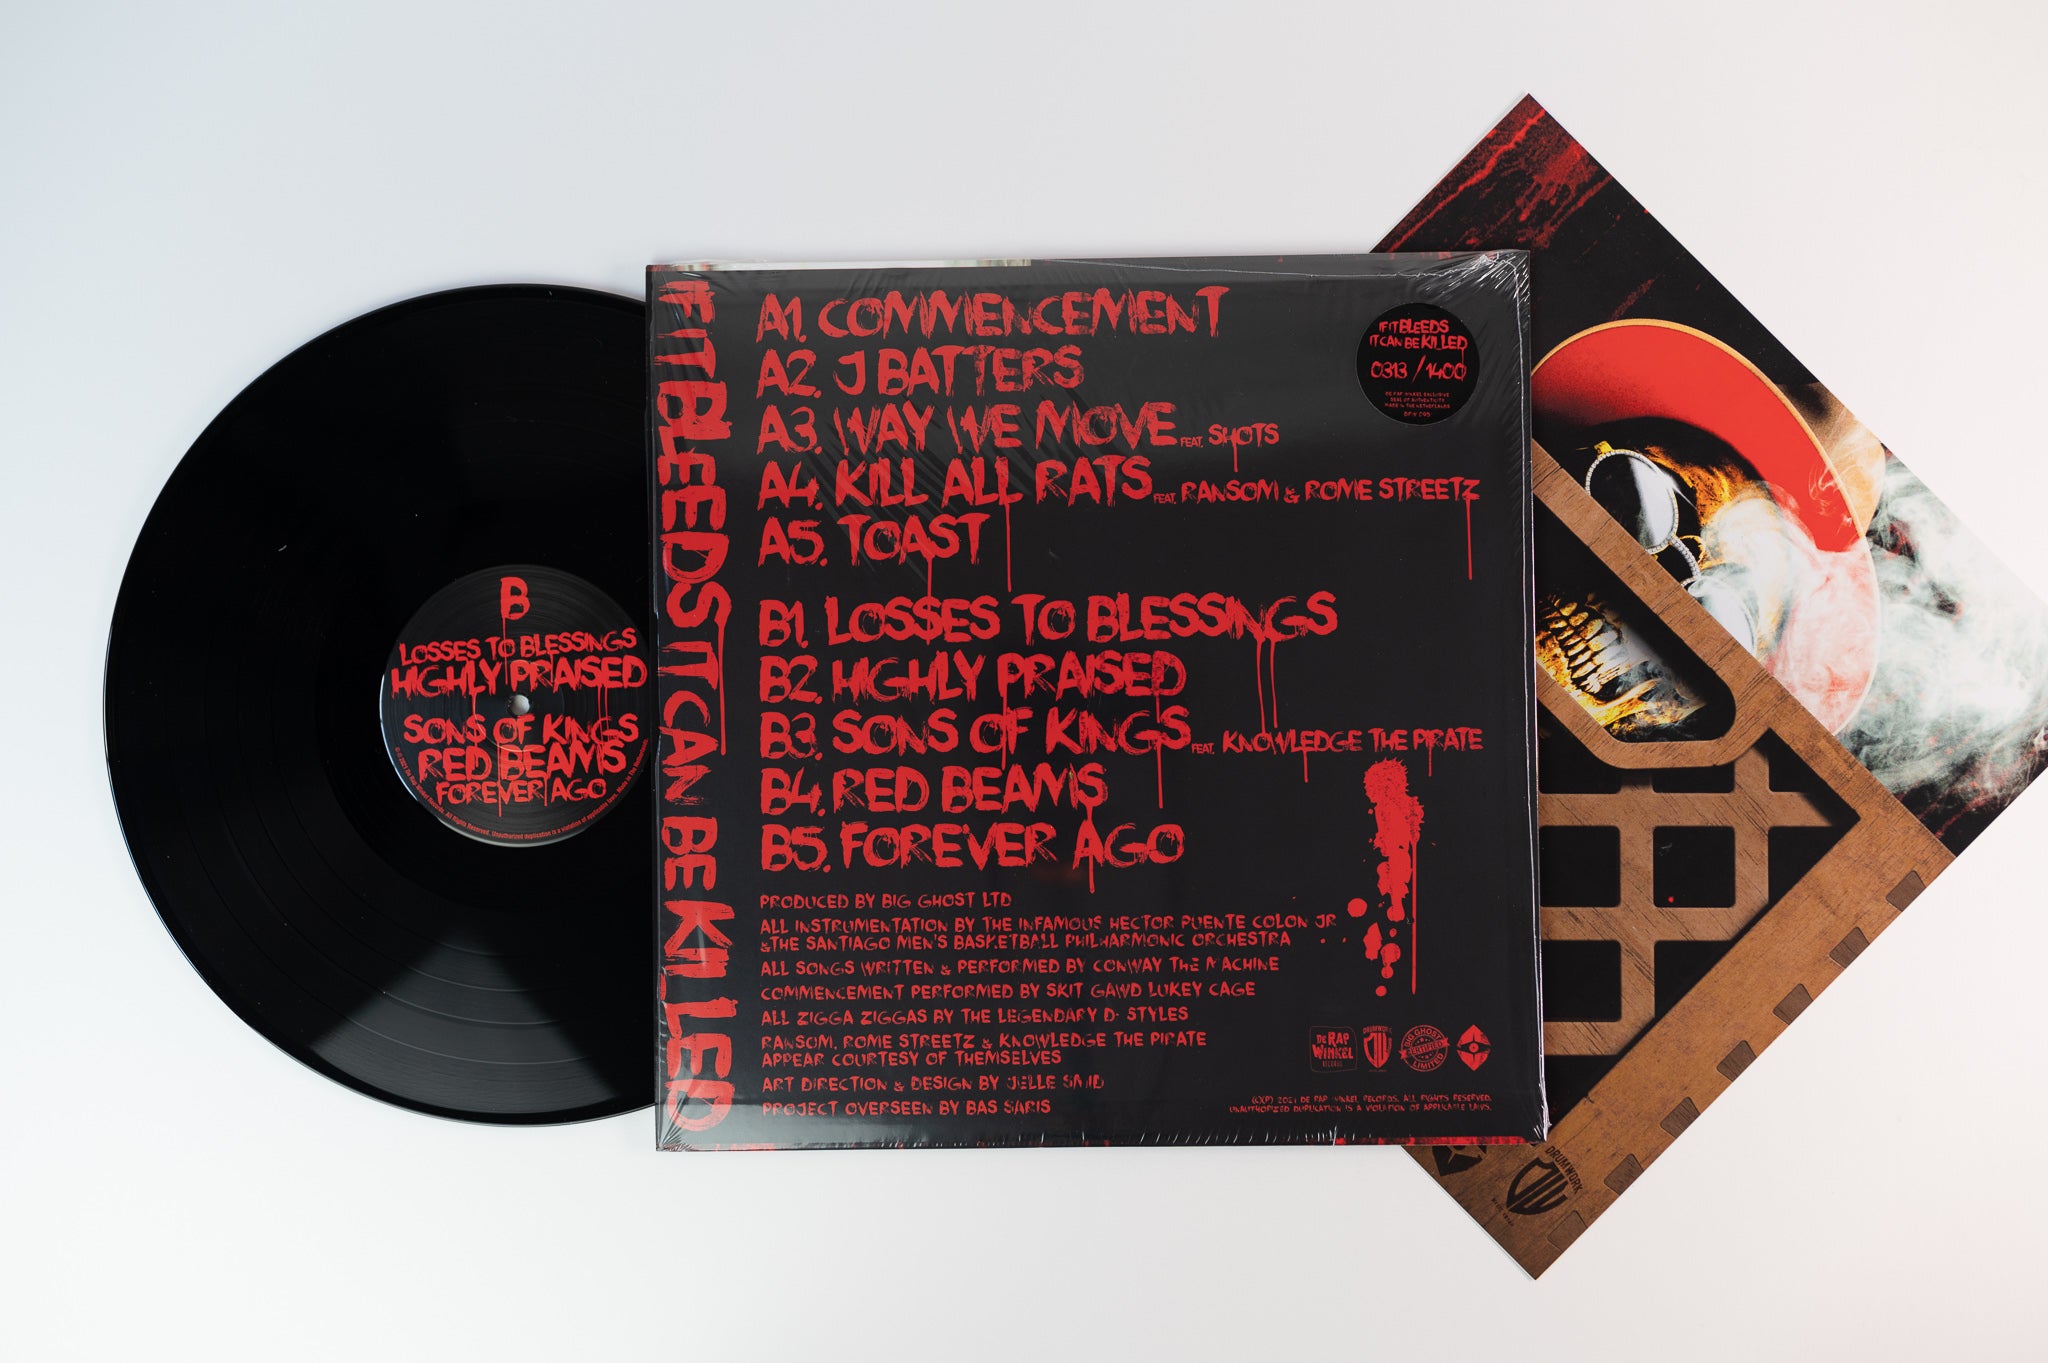 Conway - If It Bleeds It Can Be Killed on de Rap Winkel Limited Numbered